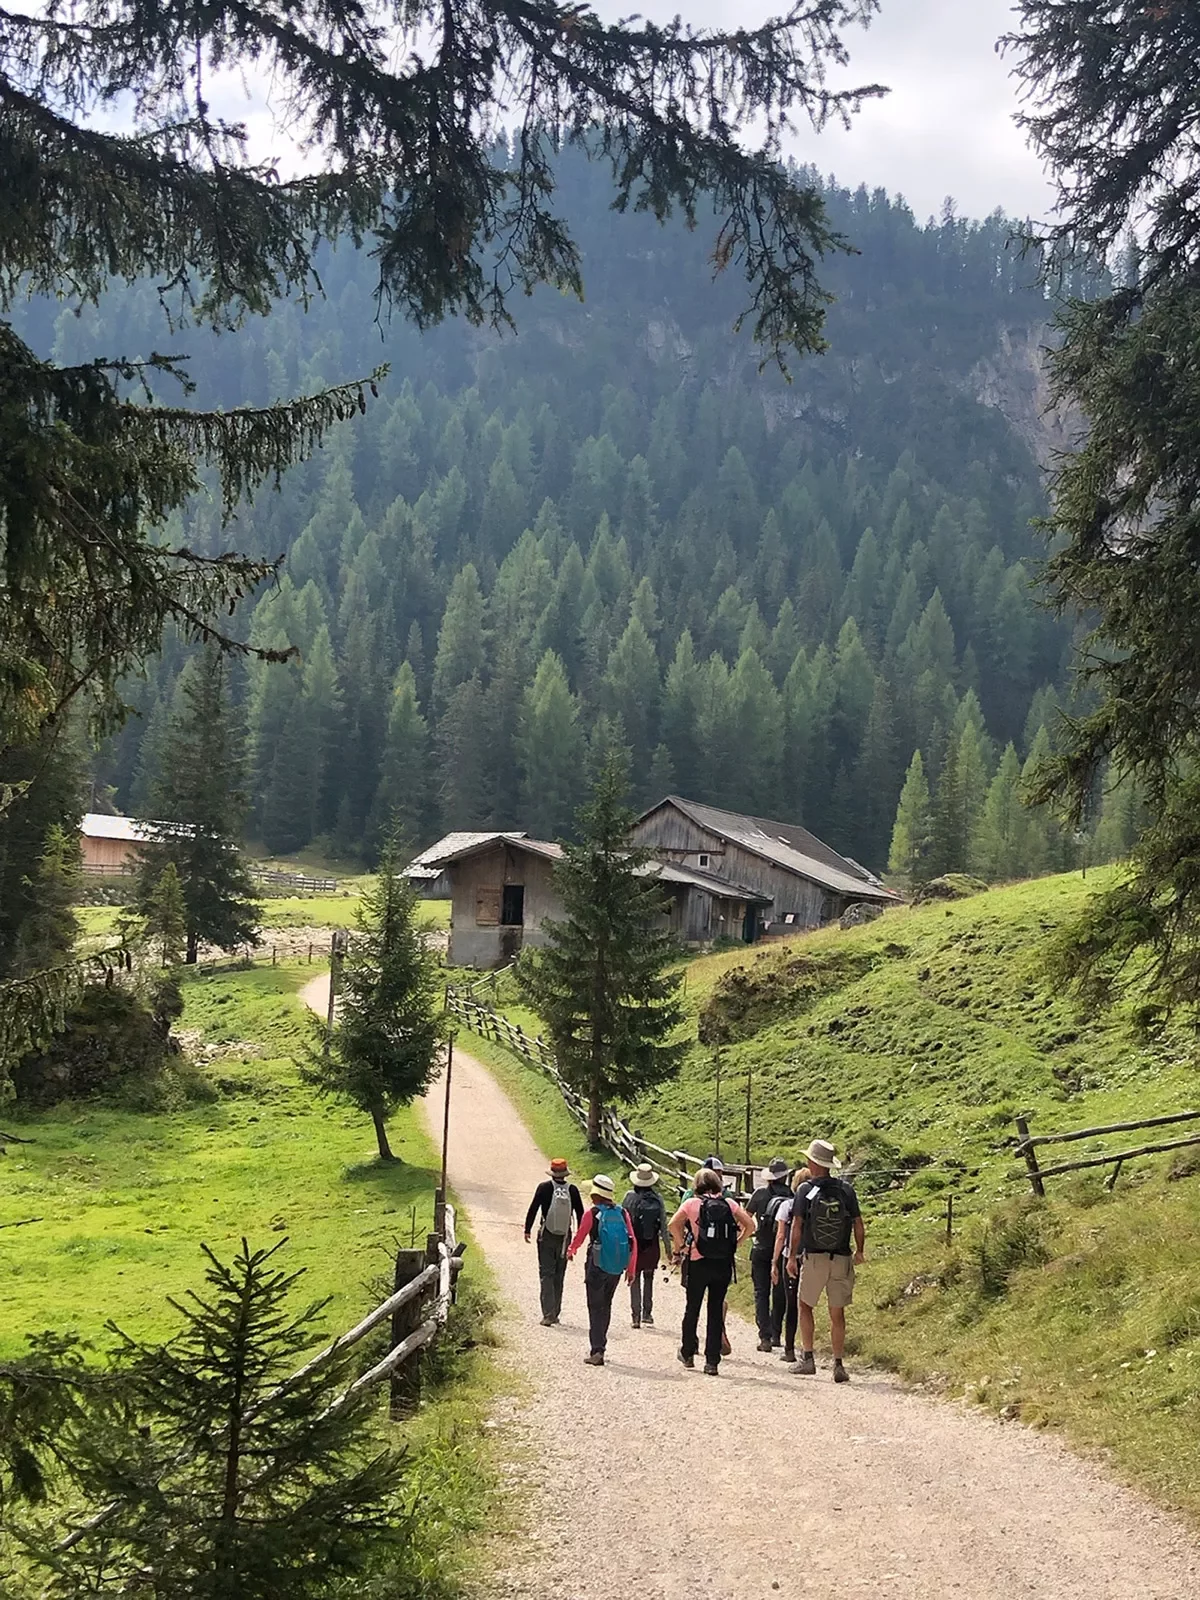 Group of guests walking towards mountain village. Forest behind them.